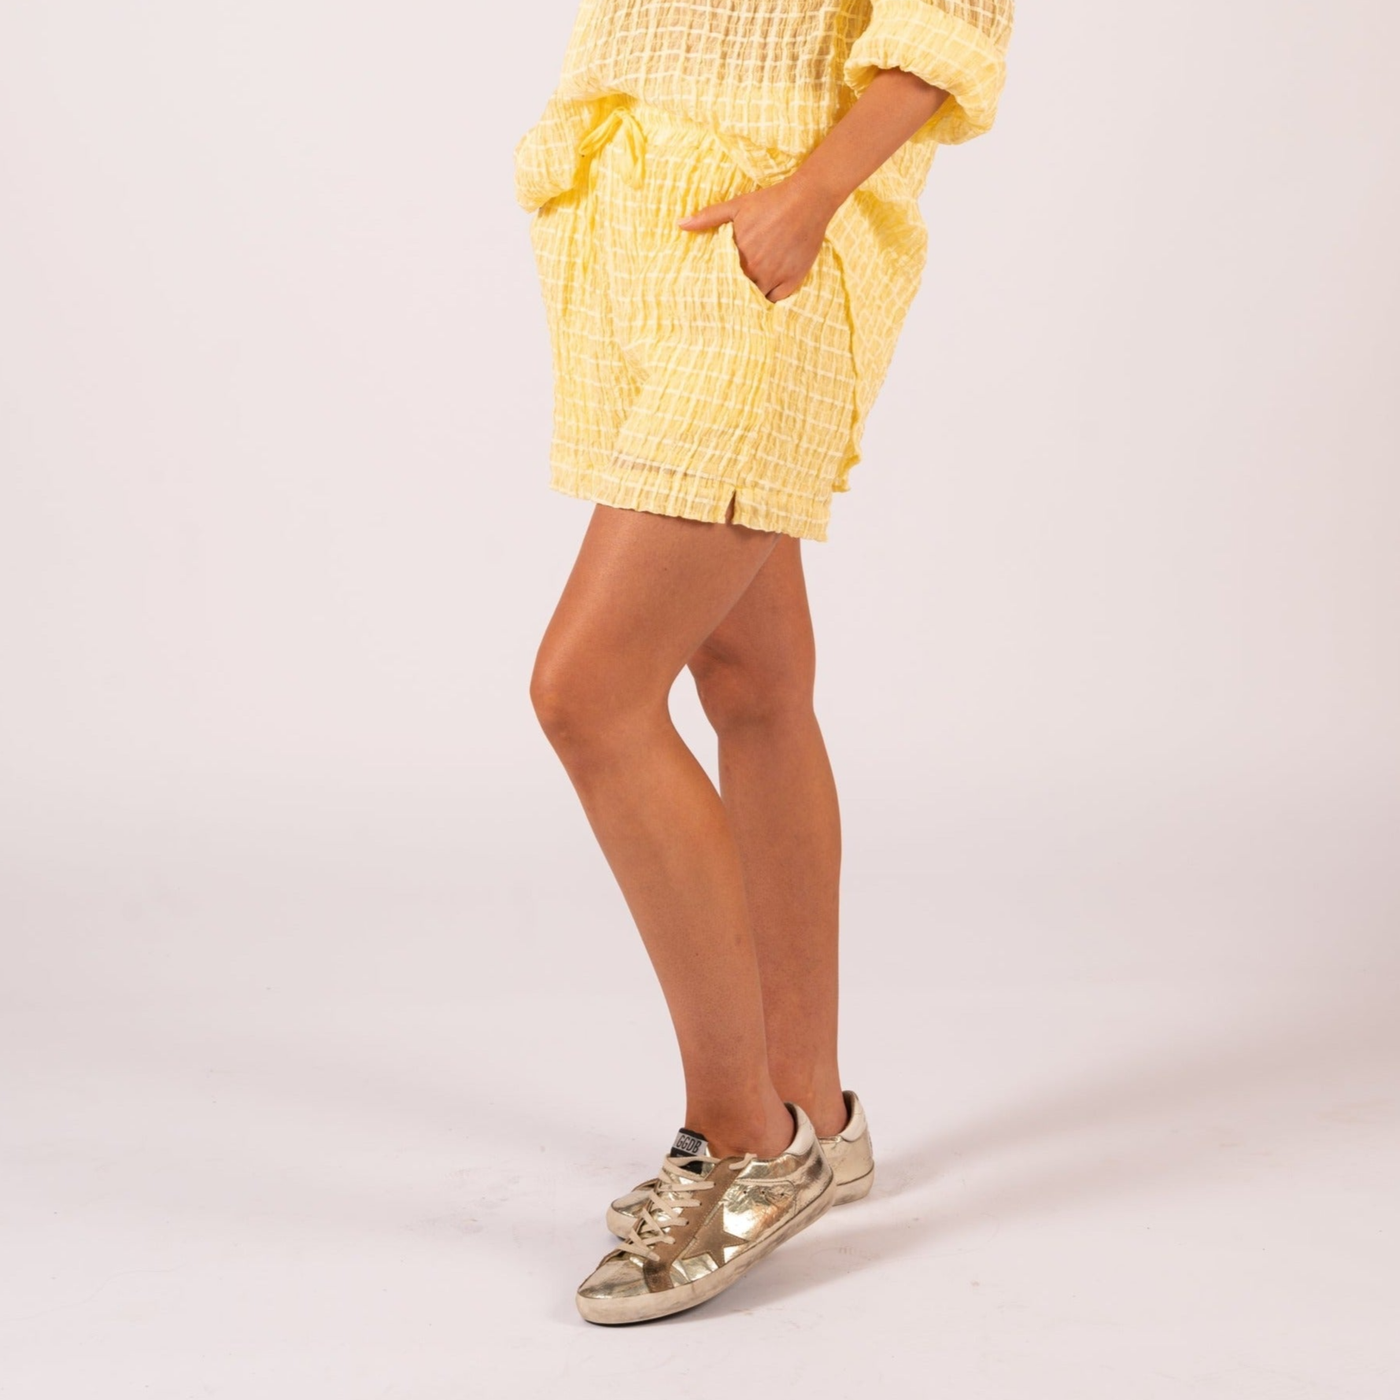 Gotstyle Fashion - We Are The Others Shorts Checks Crinkle Shorts - Yellow